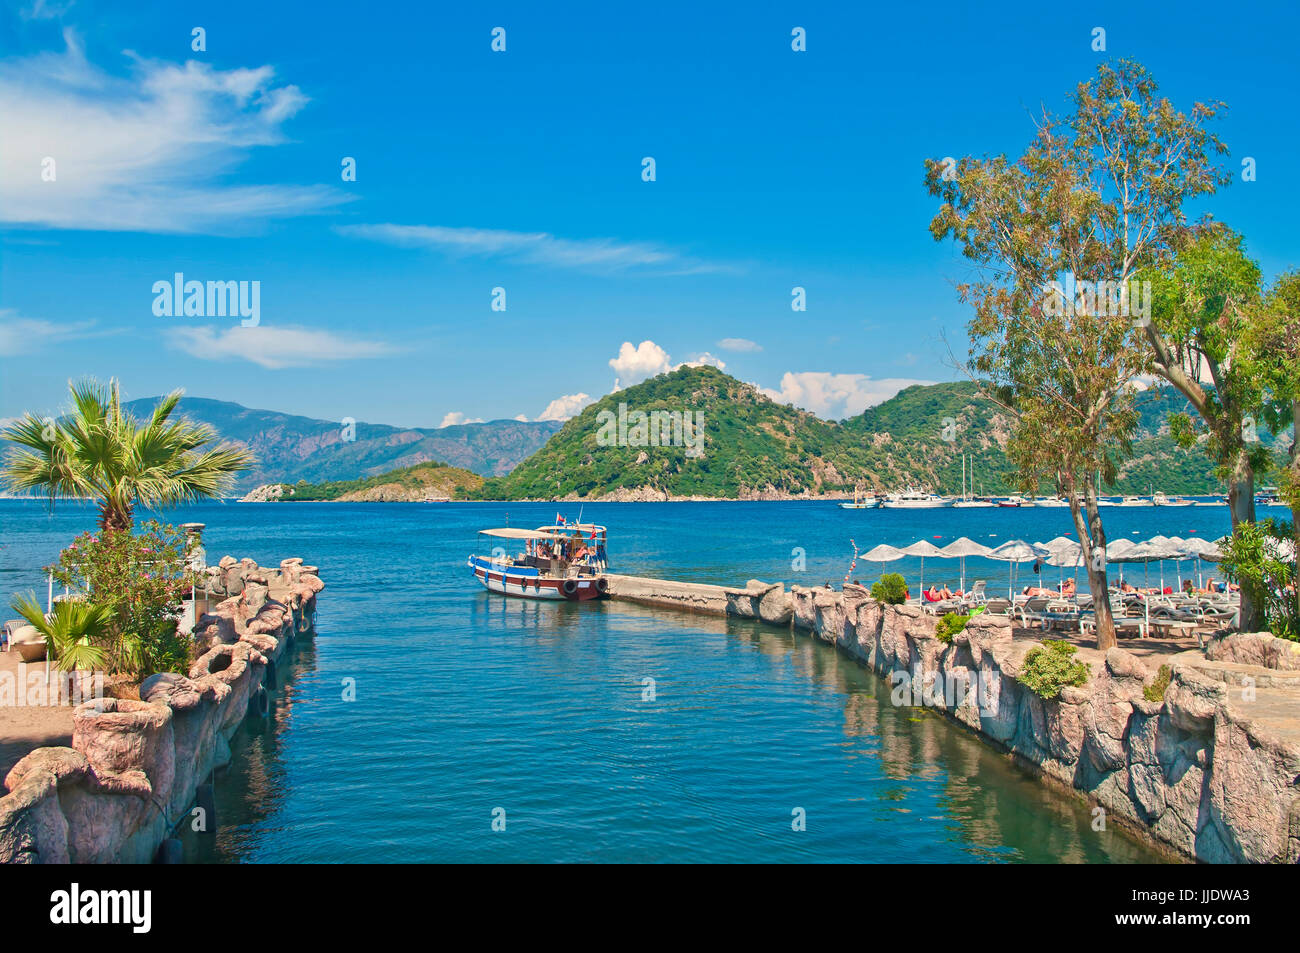 small tourist boat at Icmeler pier in Aegean sea bay with palm trees at foeground and mountains at background, Marmaris, Turkey Stock Photo